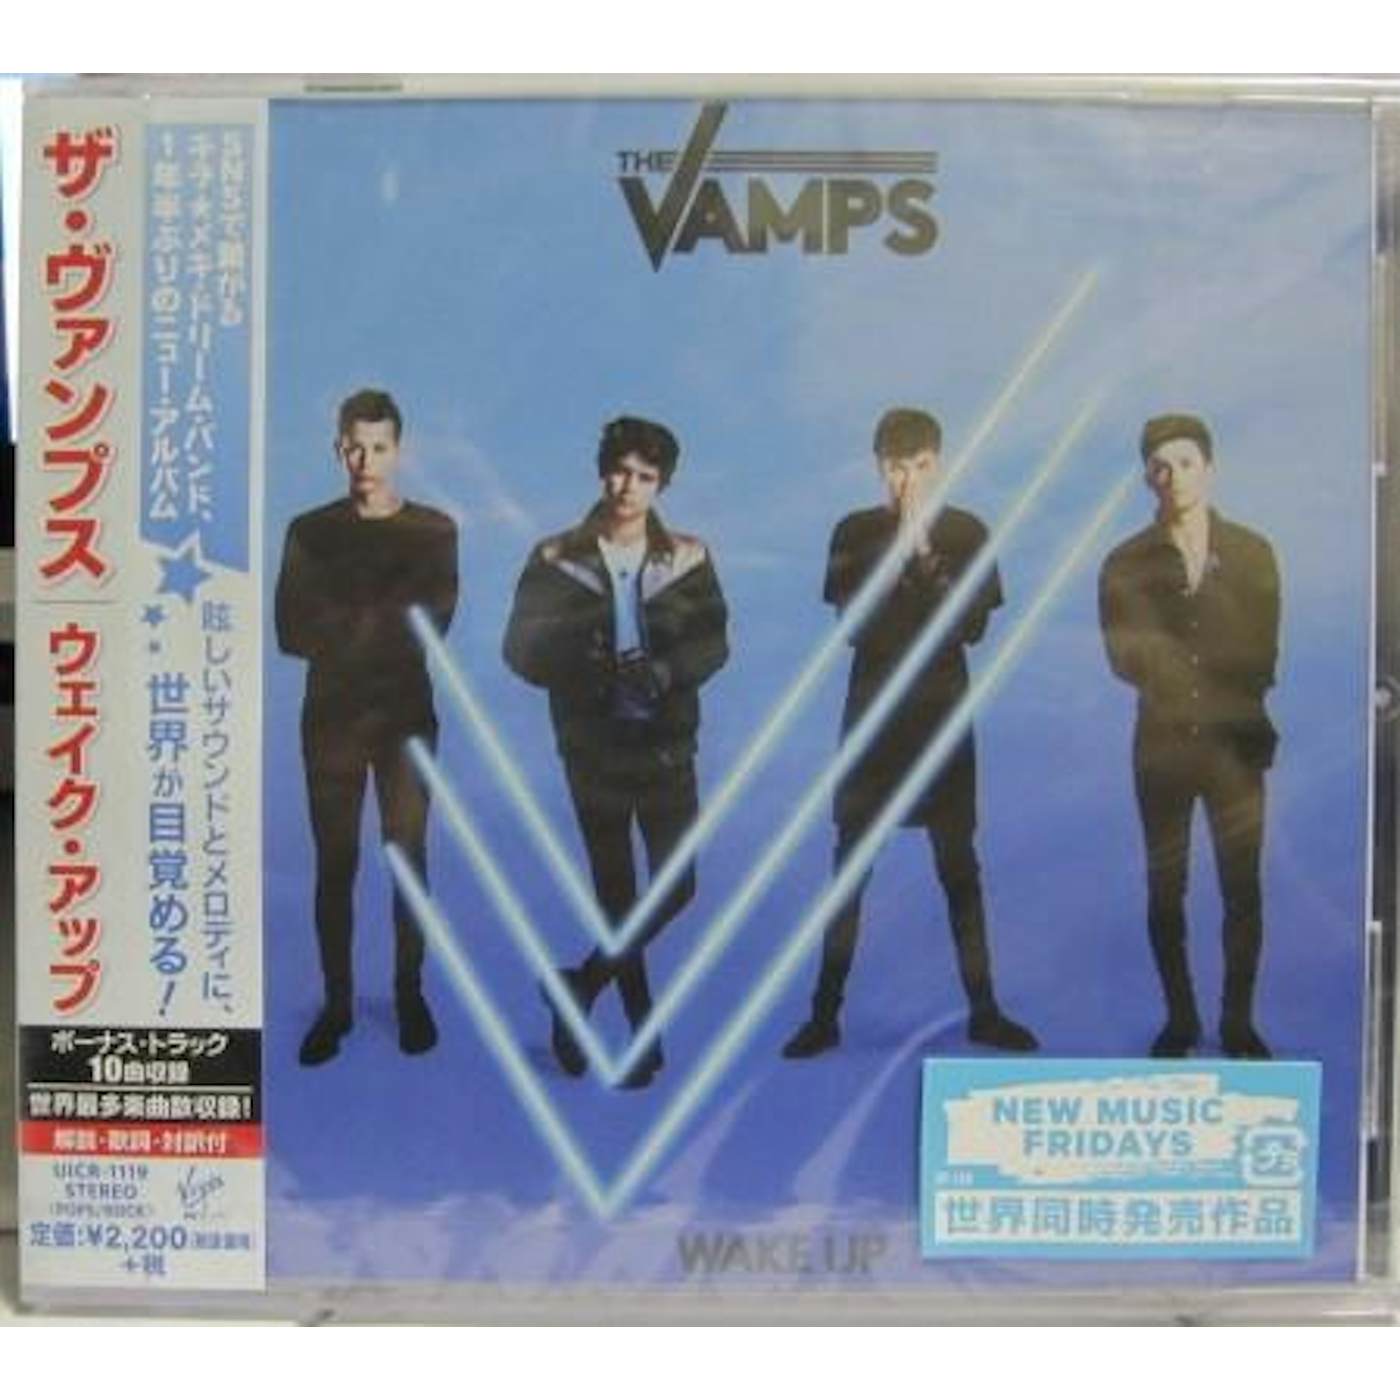 The Vamps WAKE UP CD